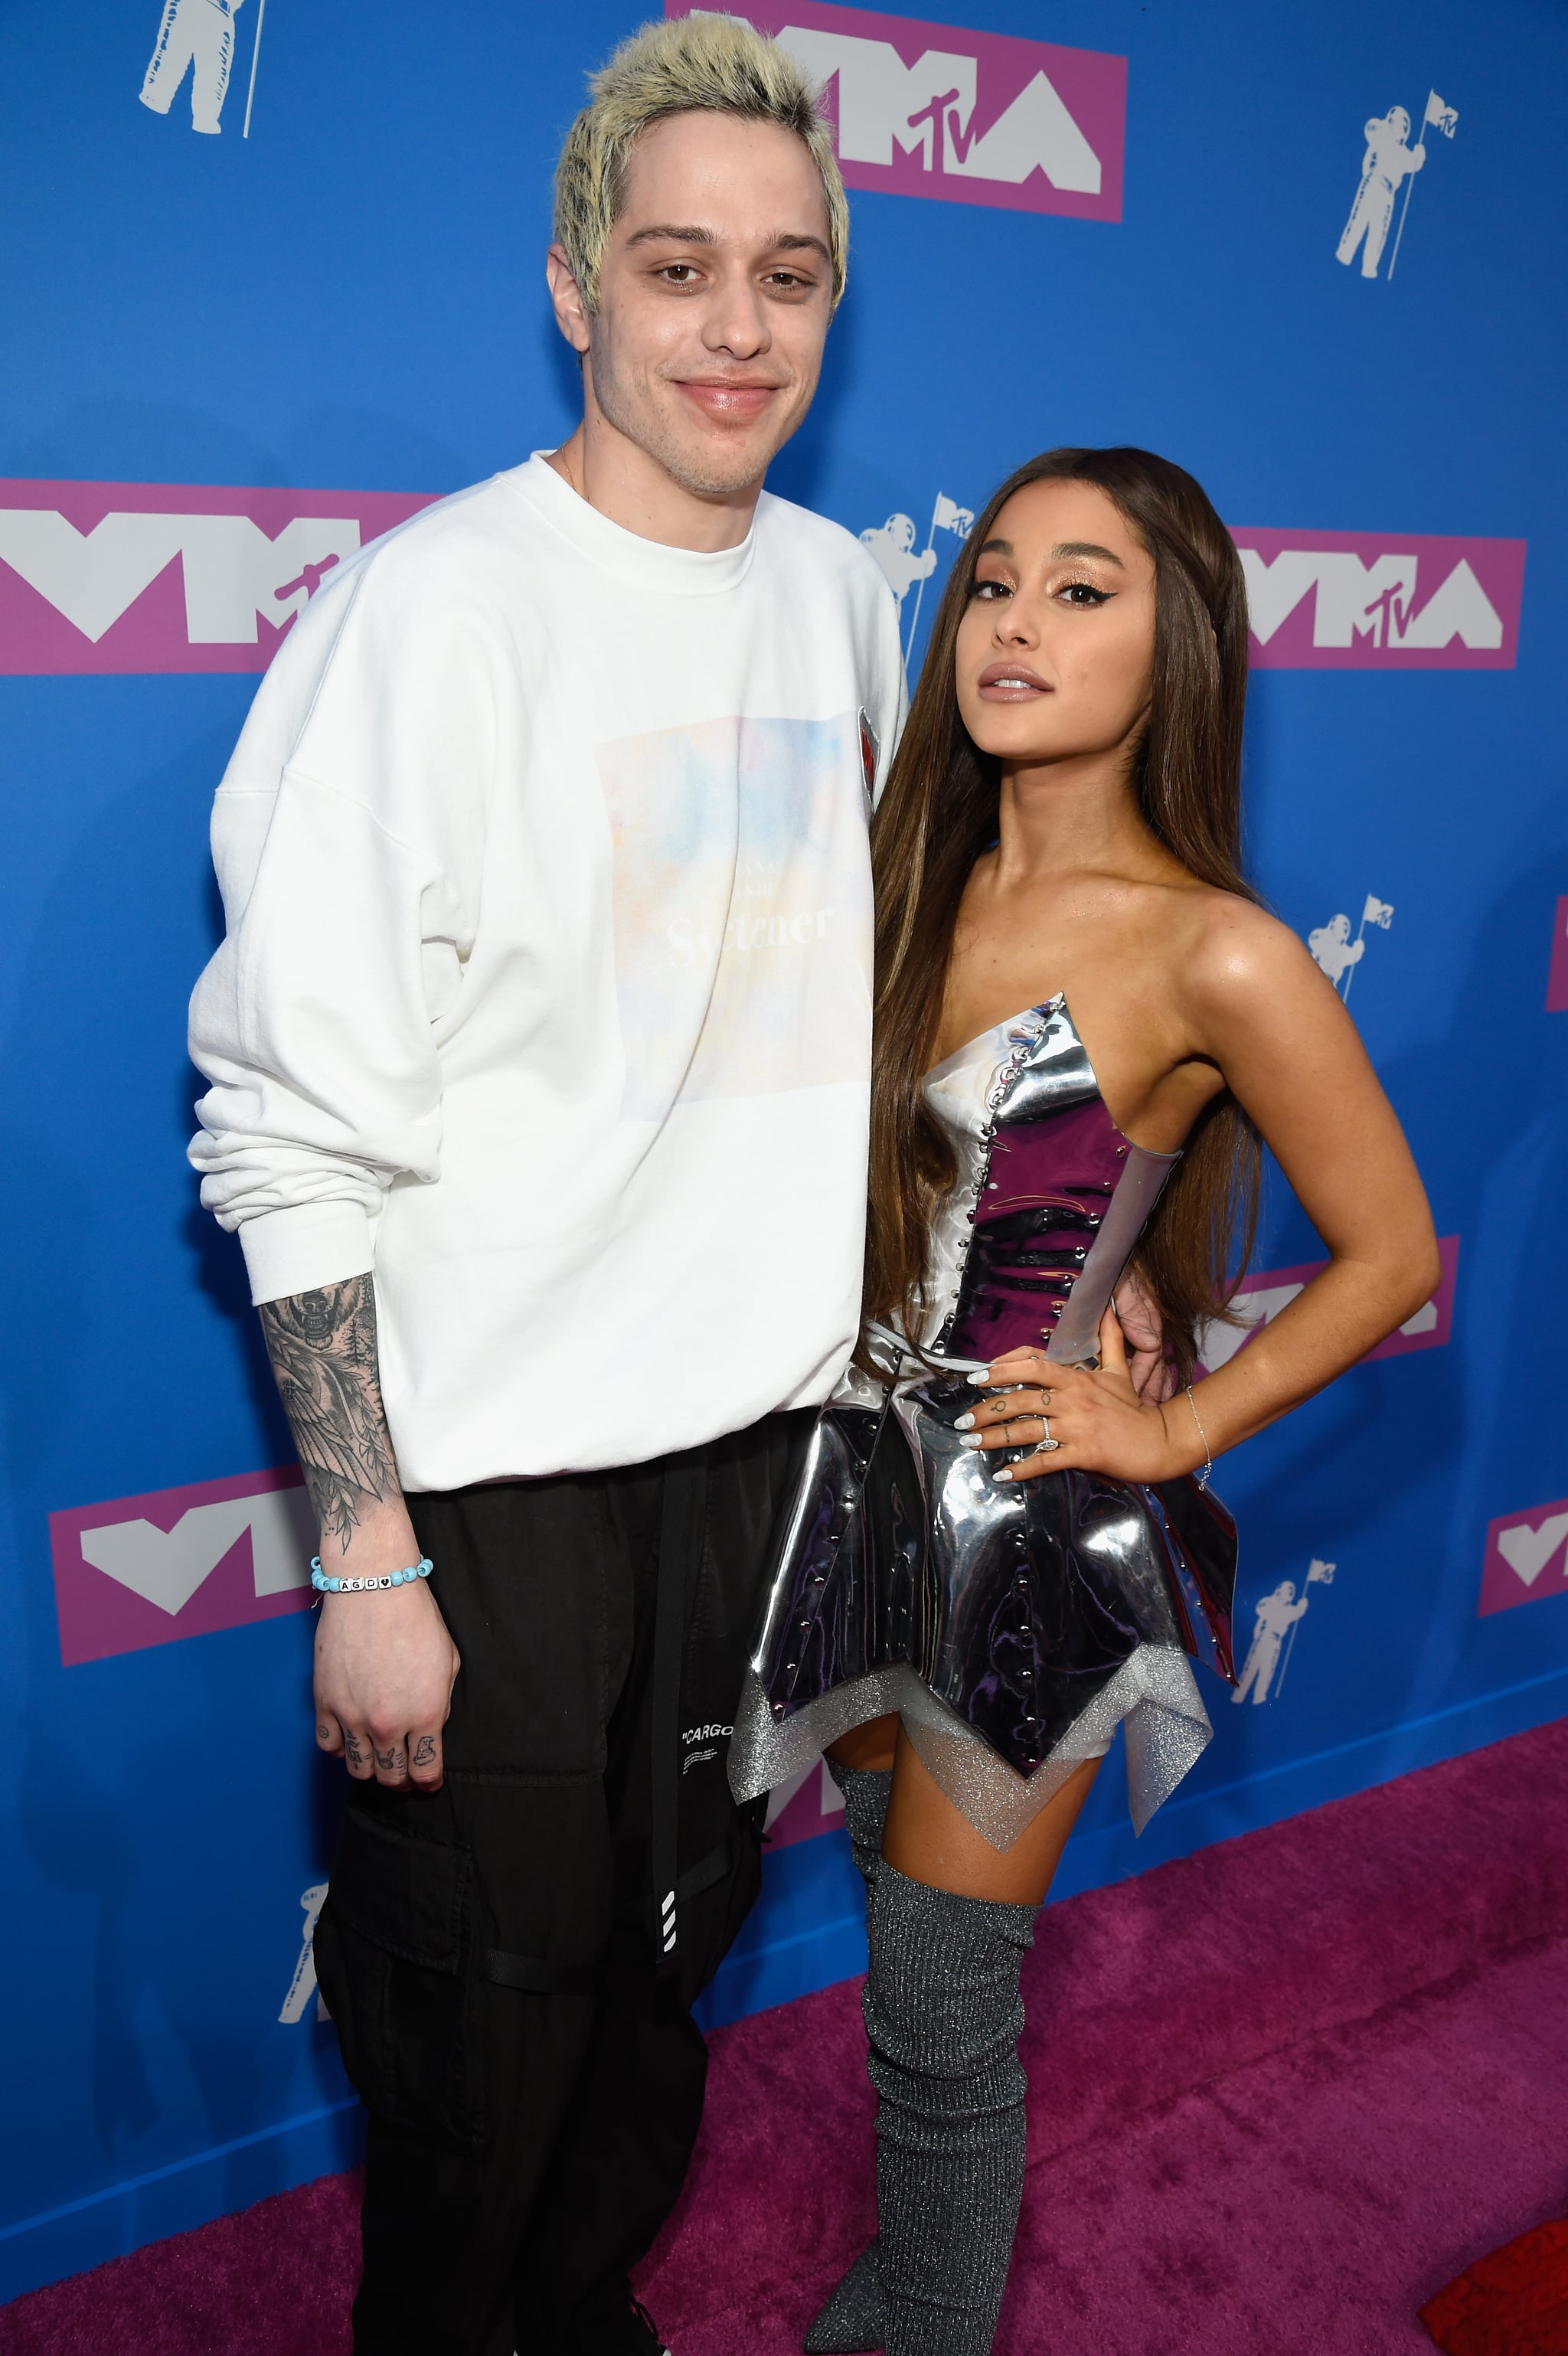 NEW YORK, NY - AUGUST 20:  Pete Davison and Ariana Grande attend the 2018 MTV Video Music Awards at Radio City Music Hall on August 20, 2018 in New York City.  (Photo by Kevin Mazur/WireImage)